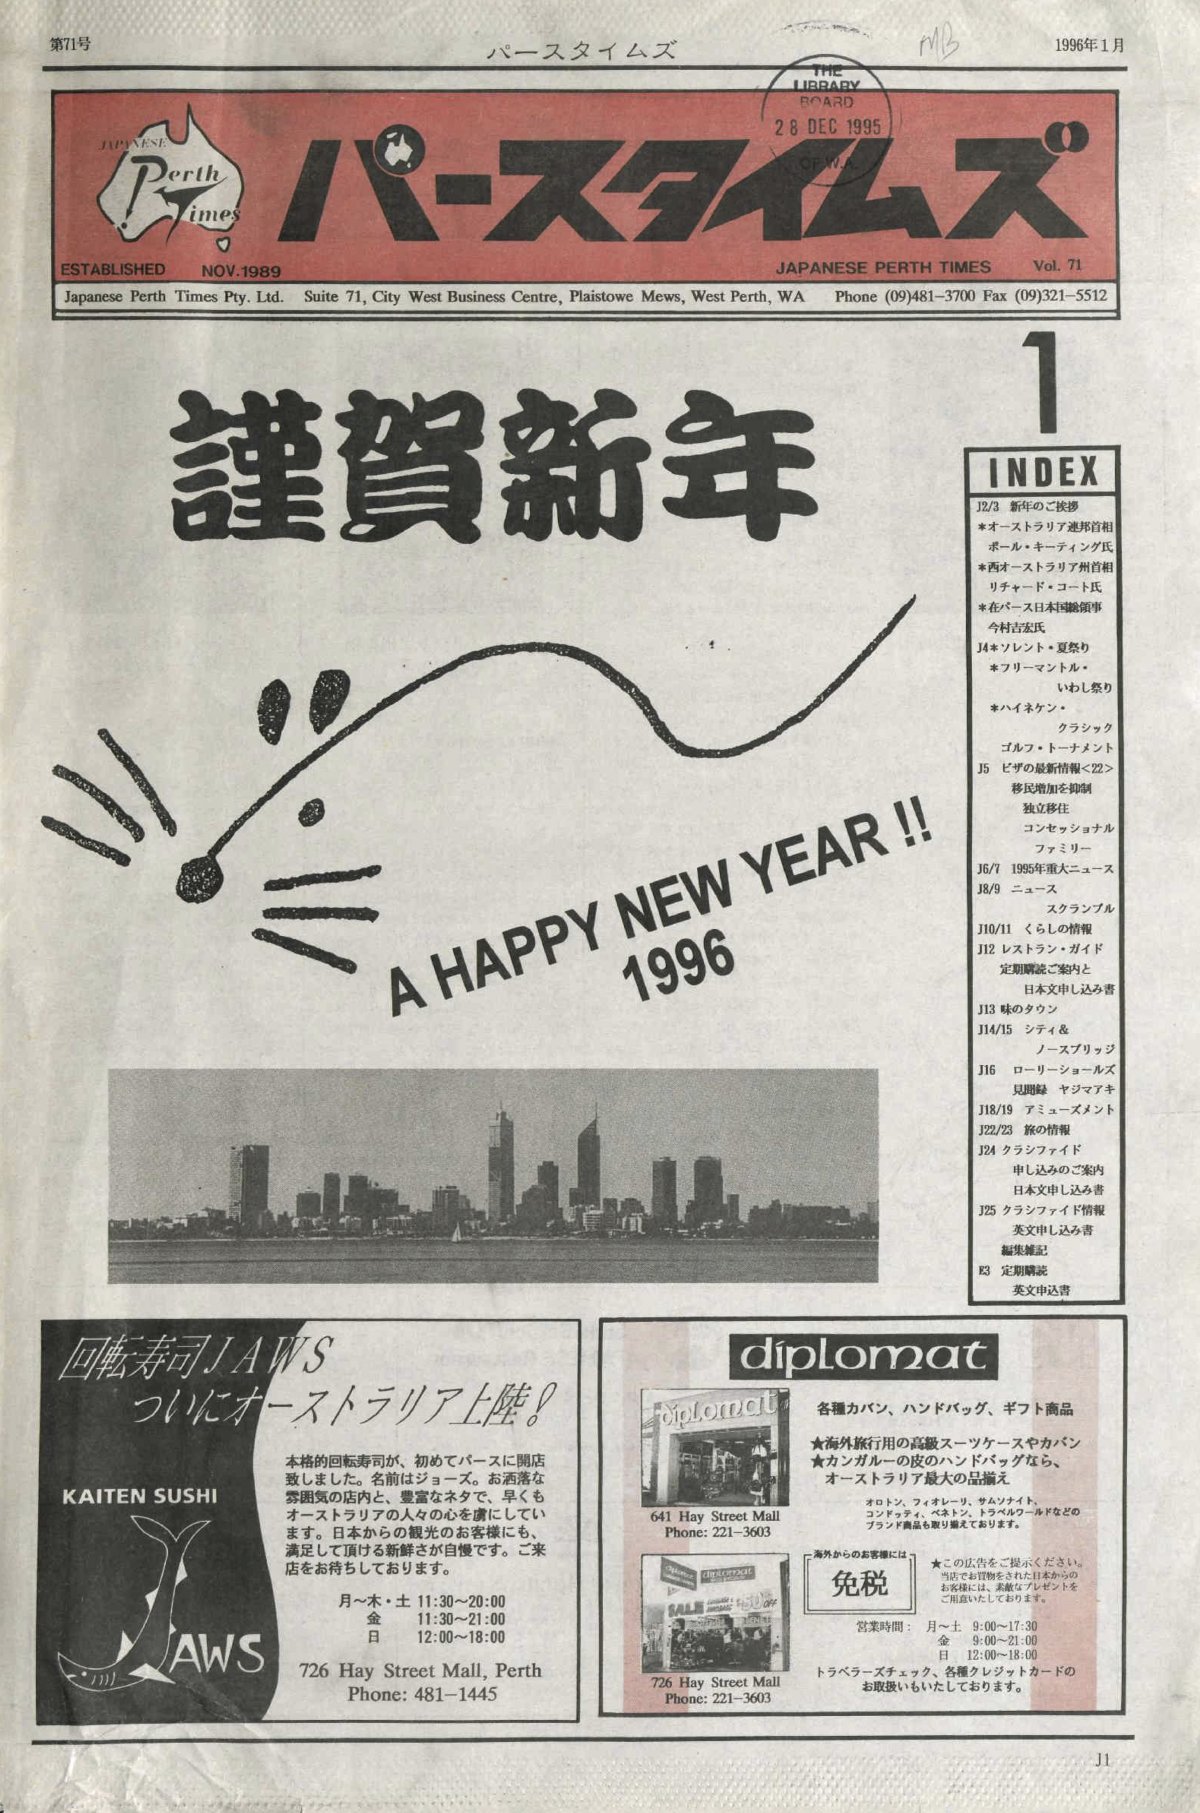 The front page of the Japanese Perth Times. The masthead is written in Japanese. There is a stylised rat on the front page with the text "A Happy New Year!! 1996"